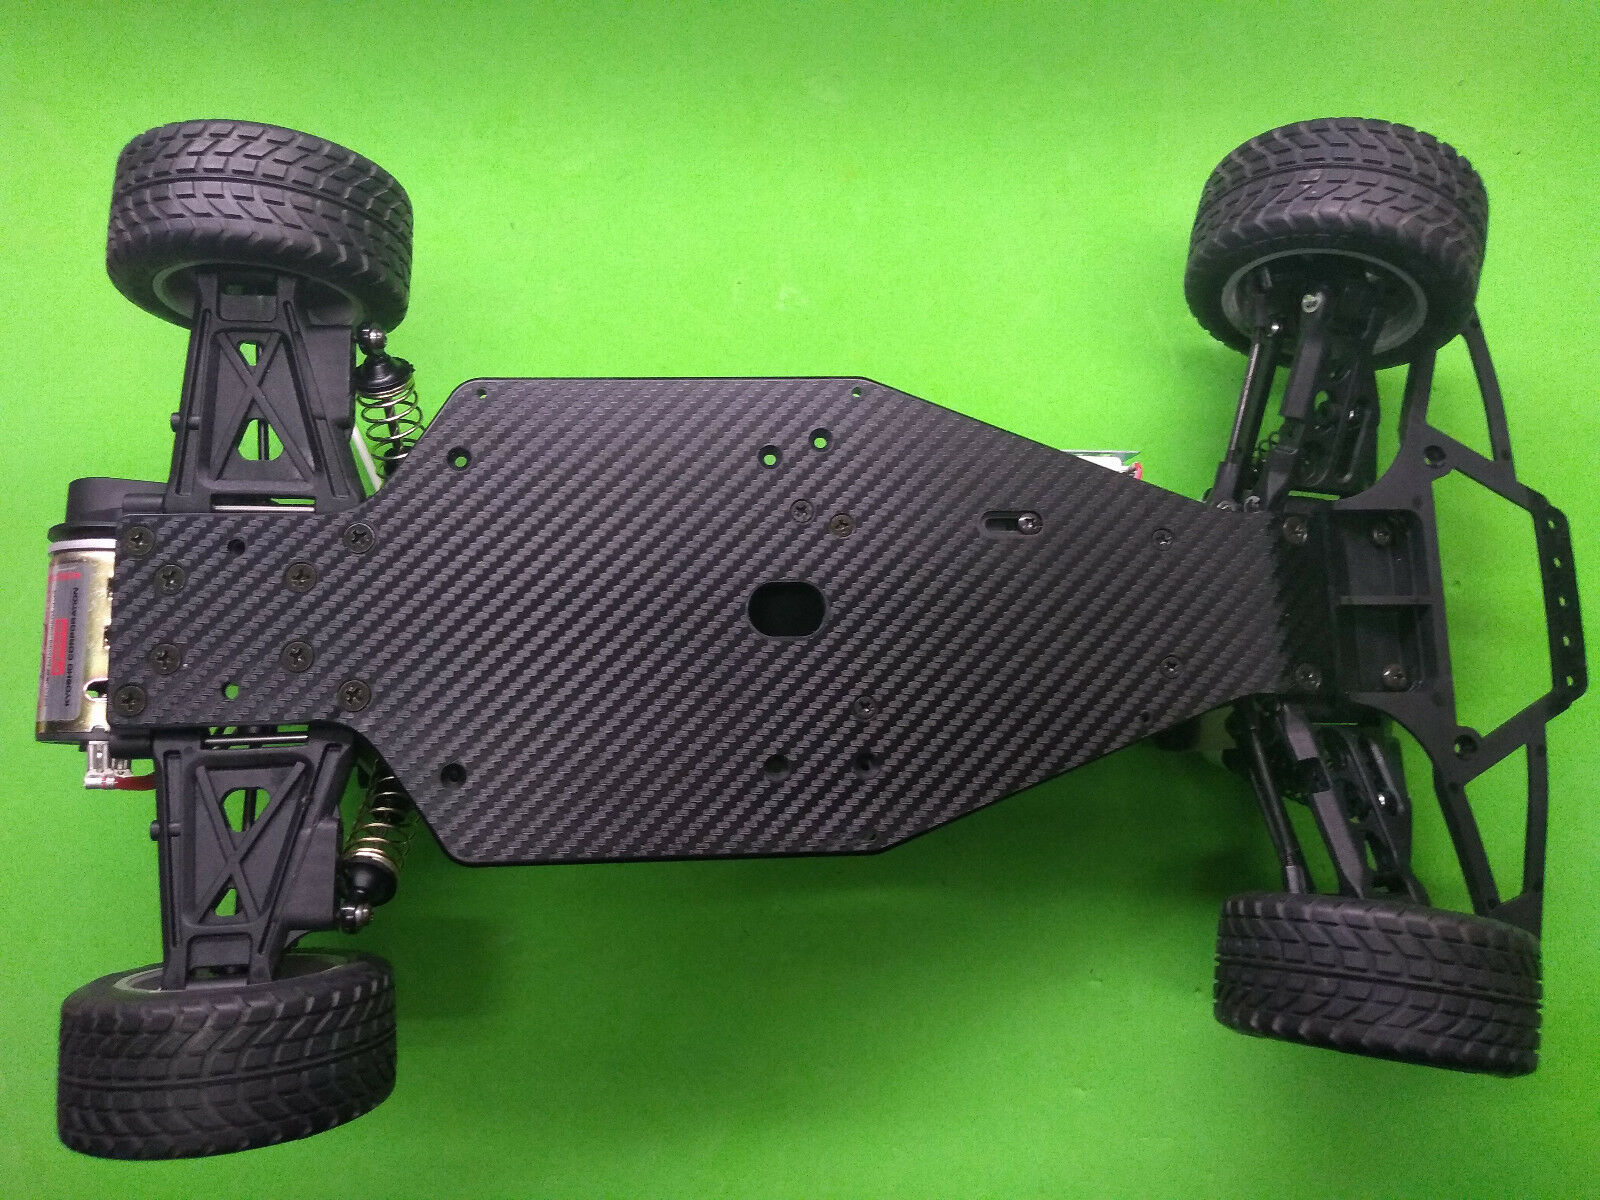 KYOSHO ULTIMA SCALE SERIES F40 300ZX 911 Chassis SKIN BK CARBON FIBER protector